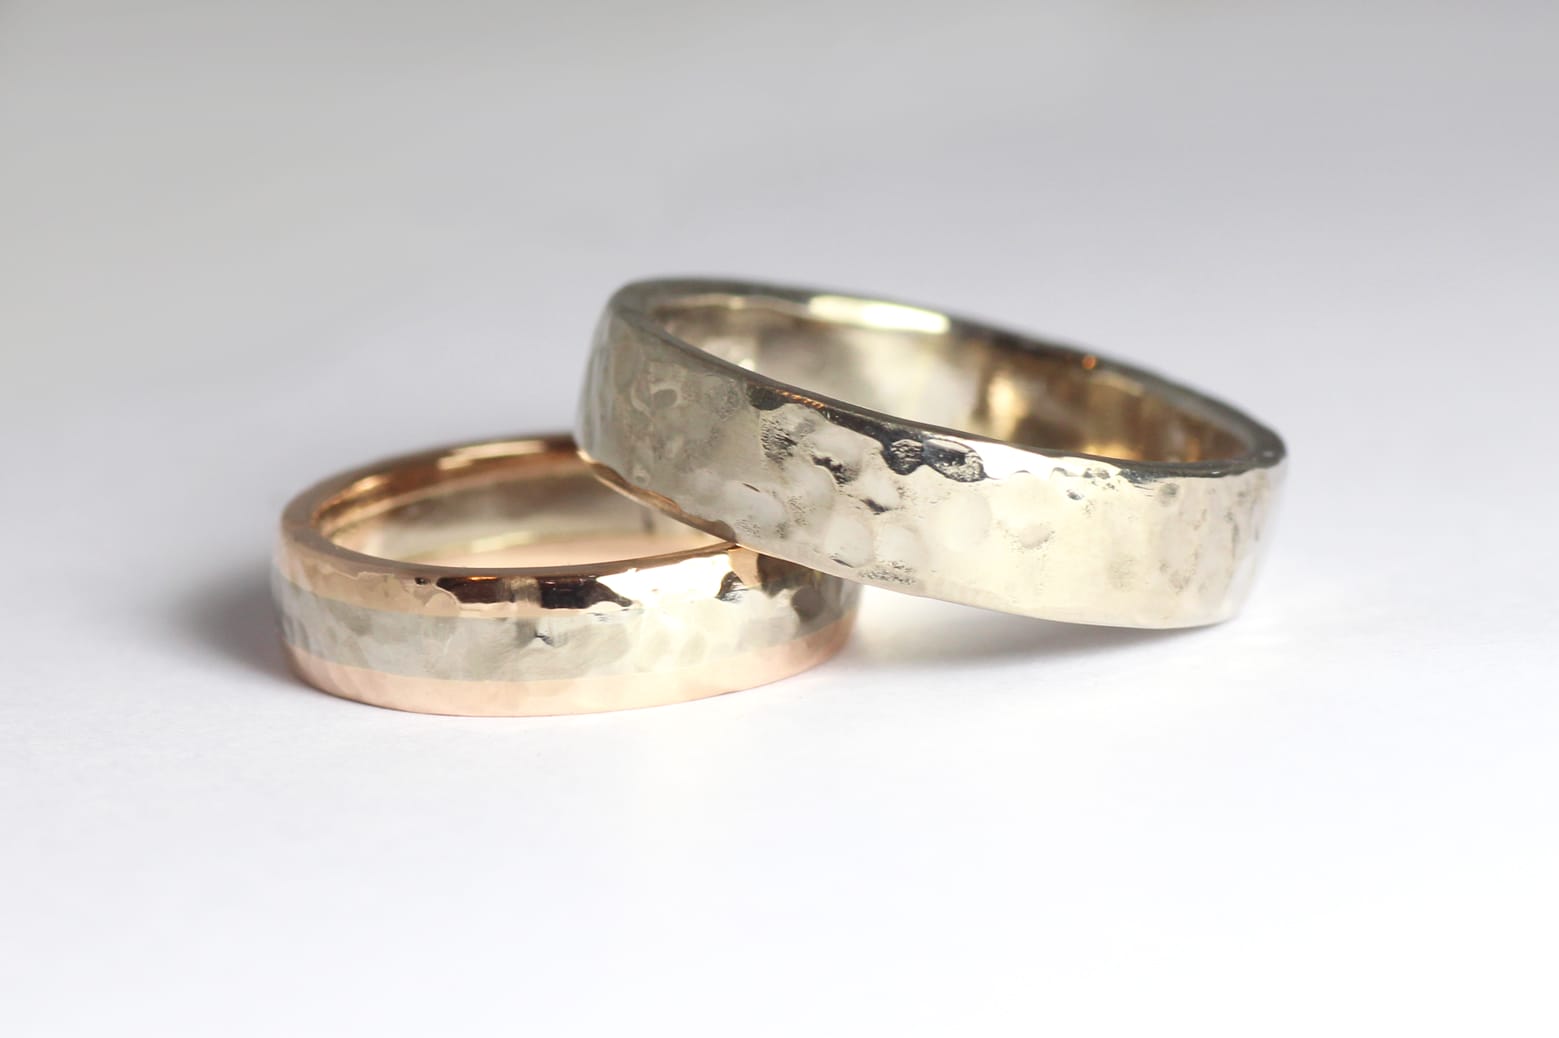 18ct Fairtrade gold wedding bands by Zoe Pook Jewellery